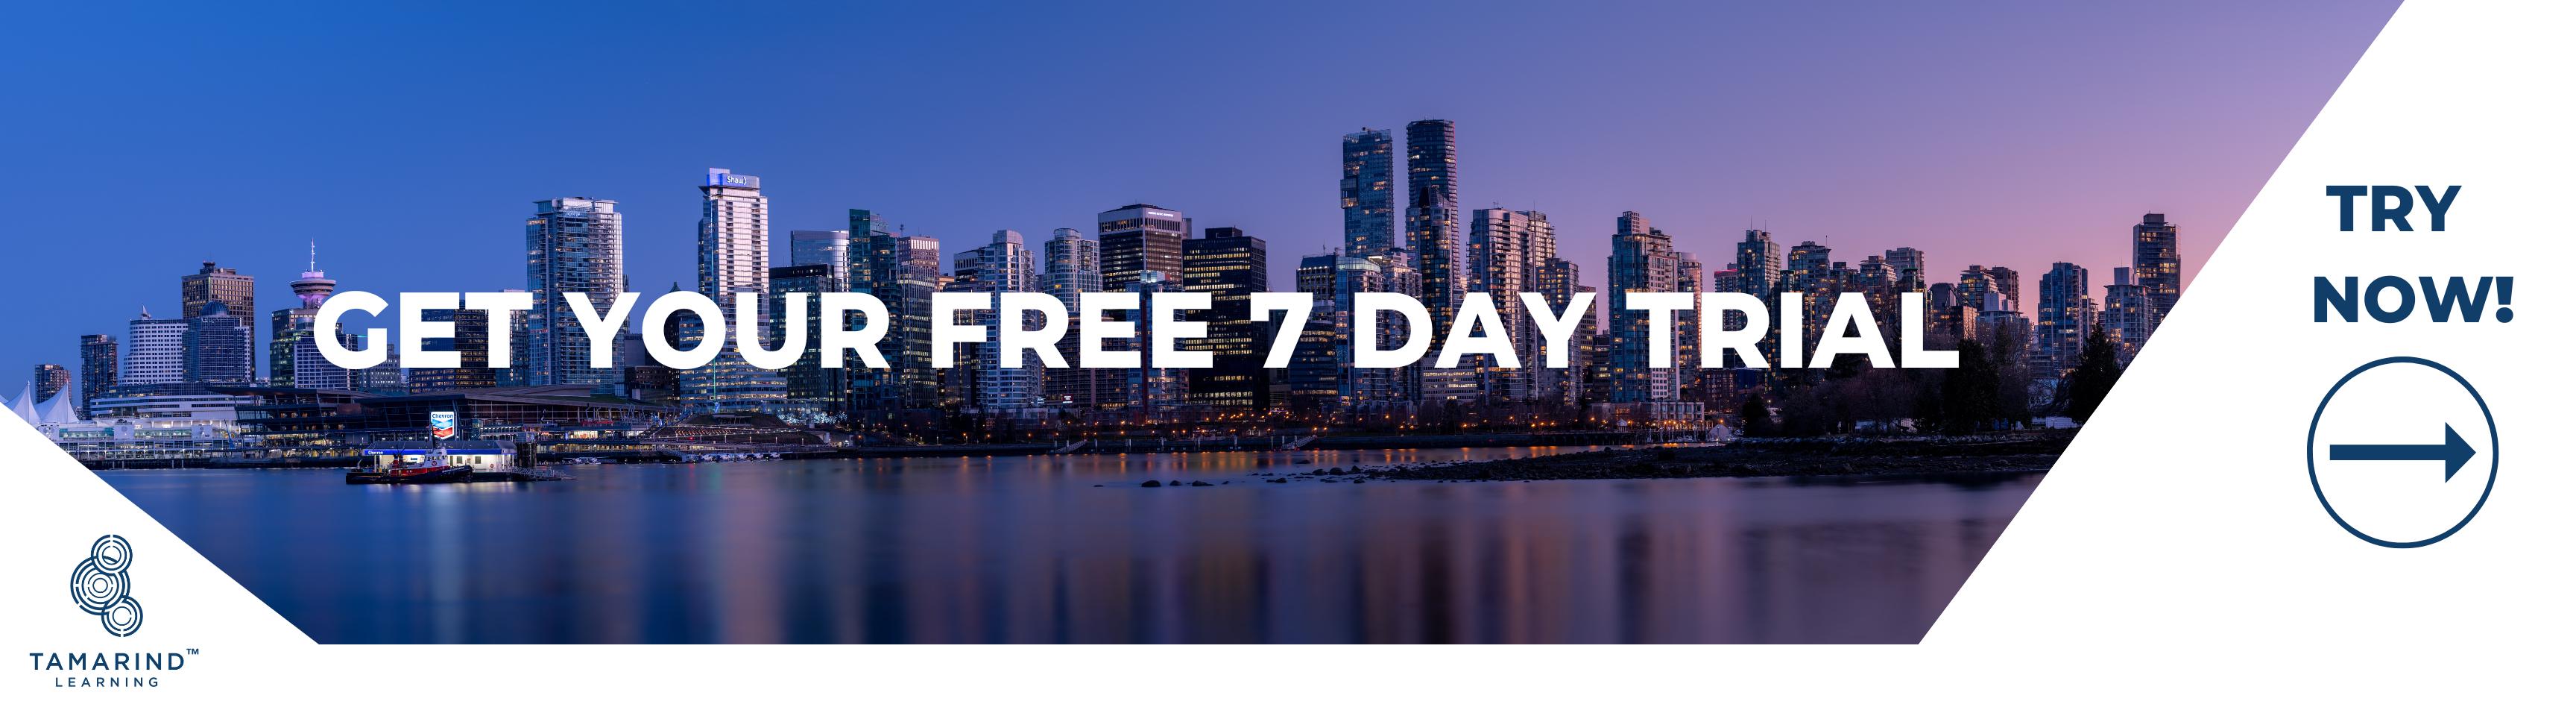 https://tamarindlearning.com/7-day-free-trial/